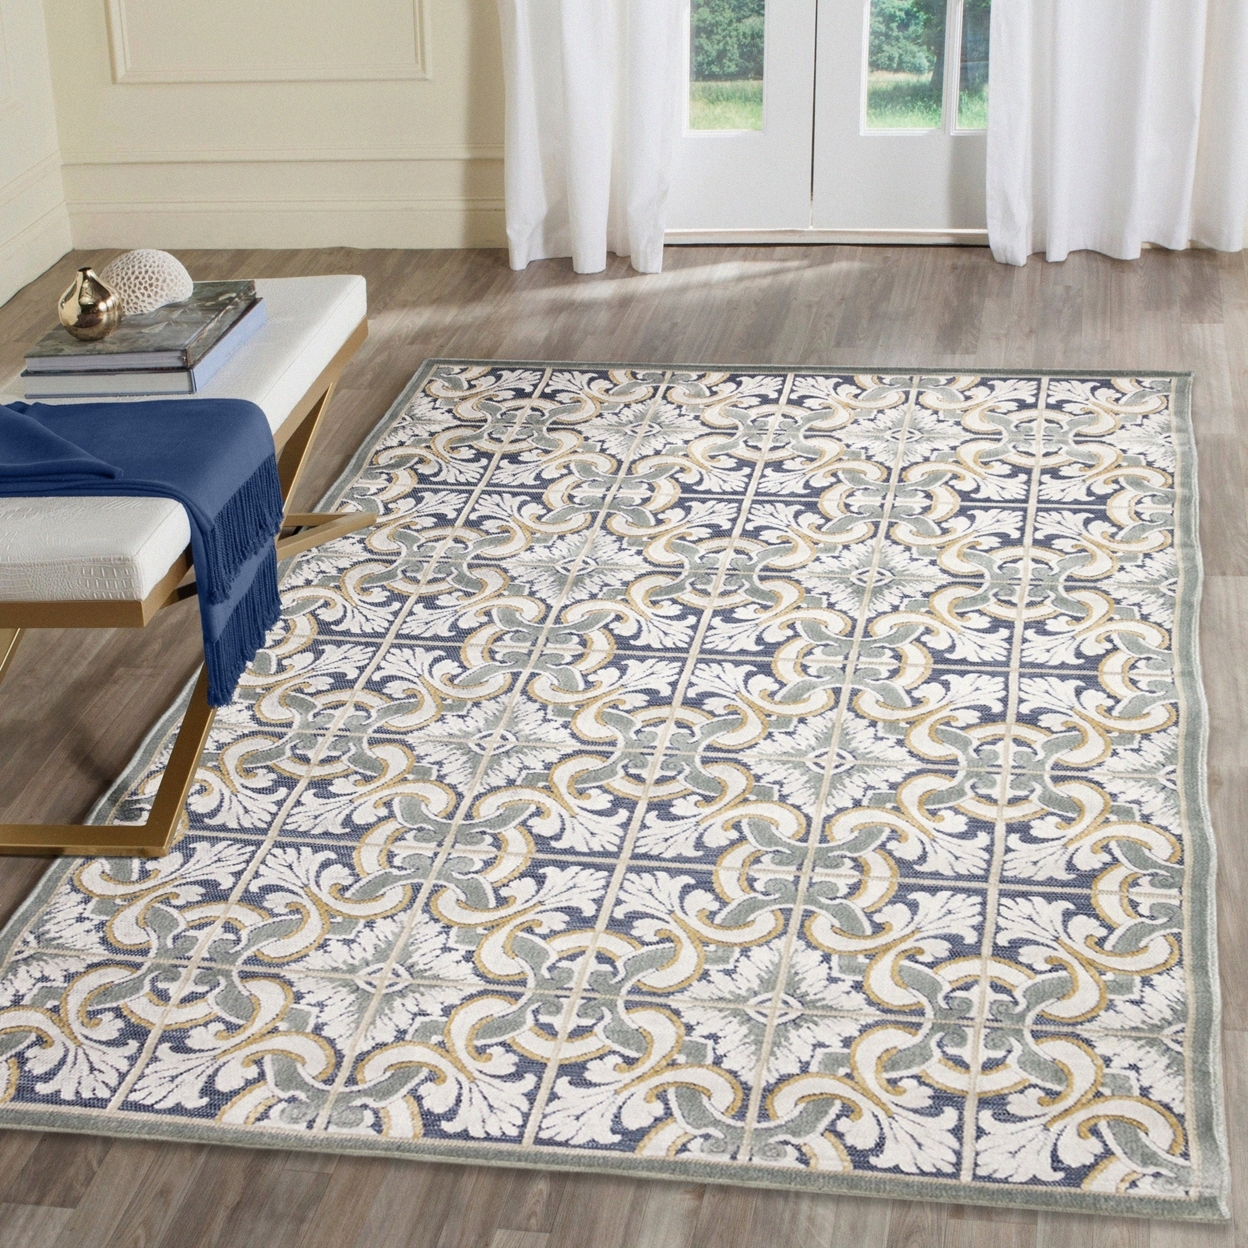 Liora Manne Canyon Floral Tile Indoor Outdoor Area Rug Navy - 4'9 X 7'6